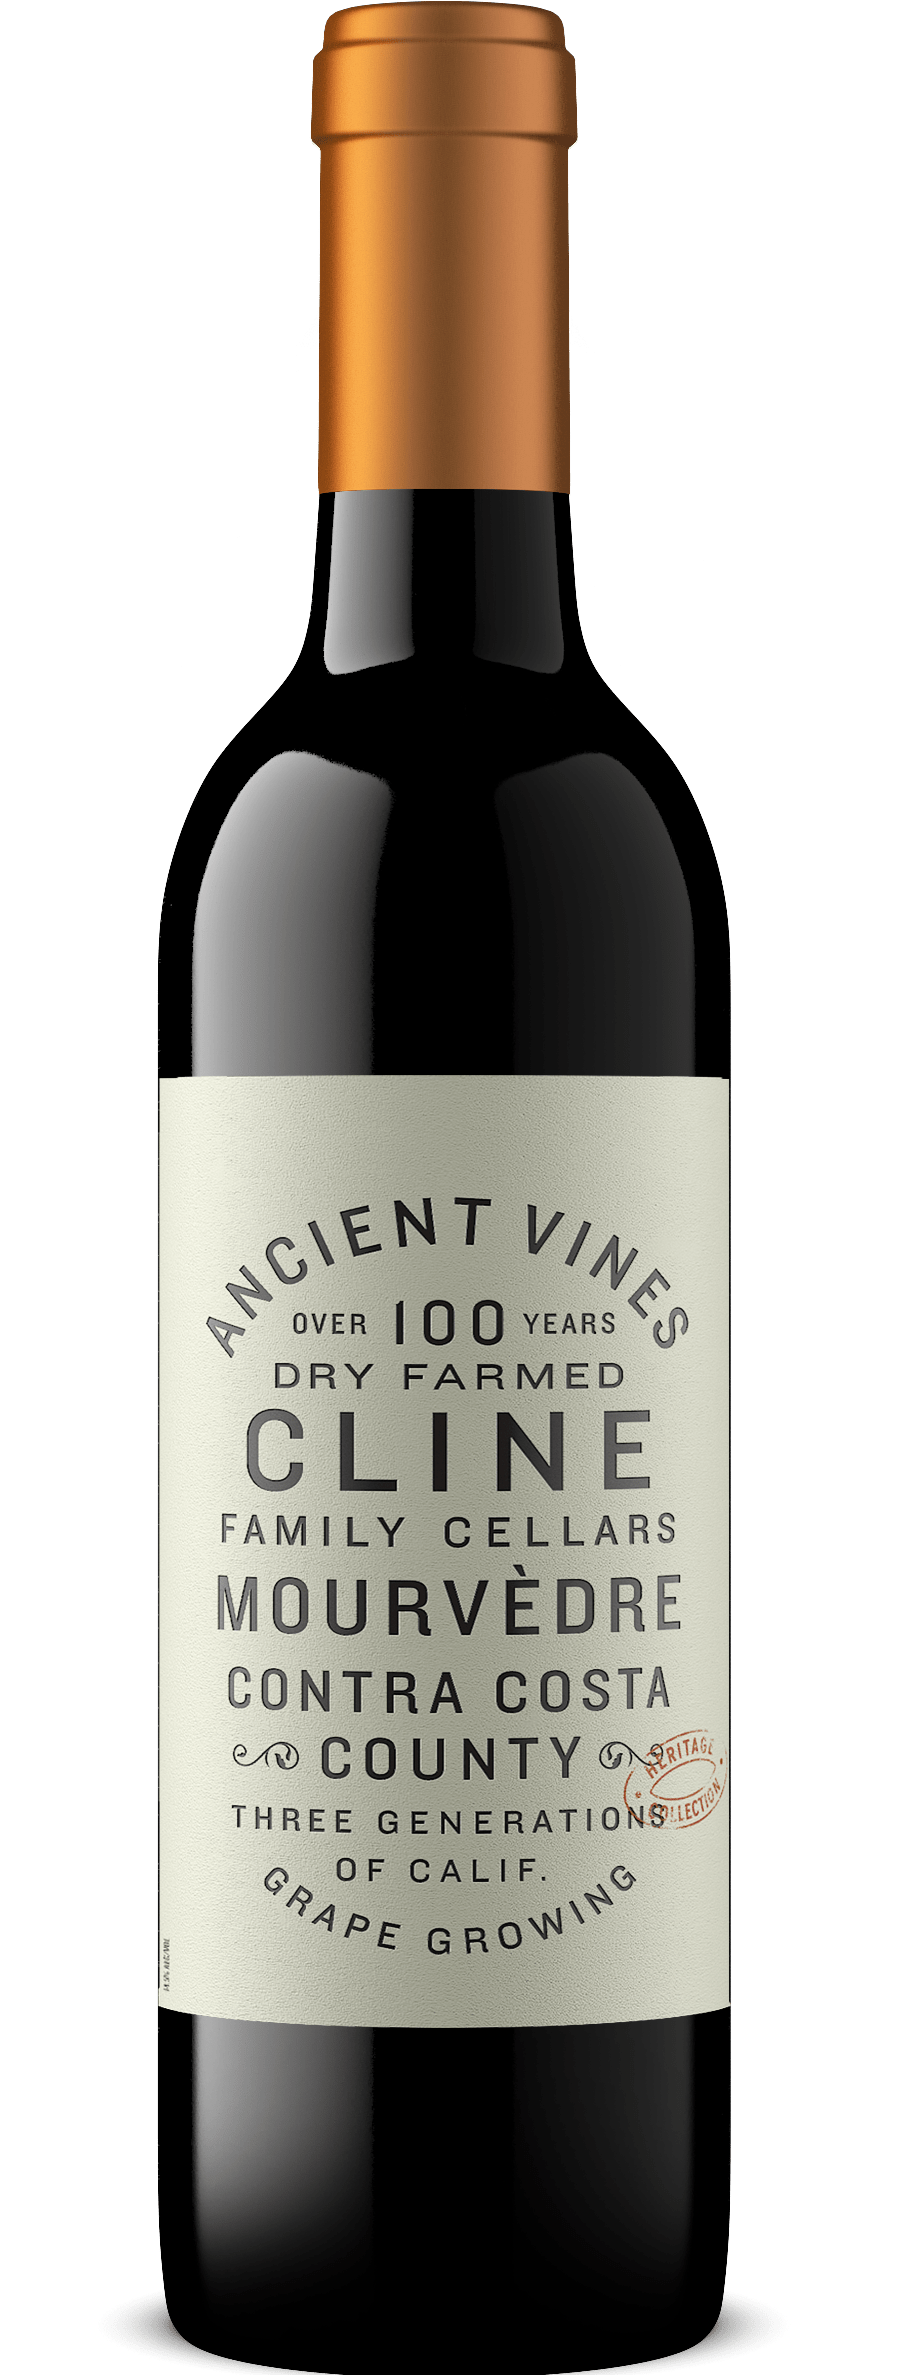 Wine Cline Ancient Vines Mourvedre Contra Costa County